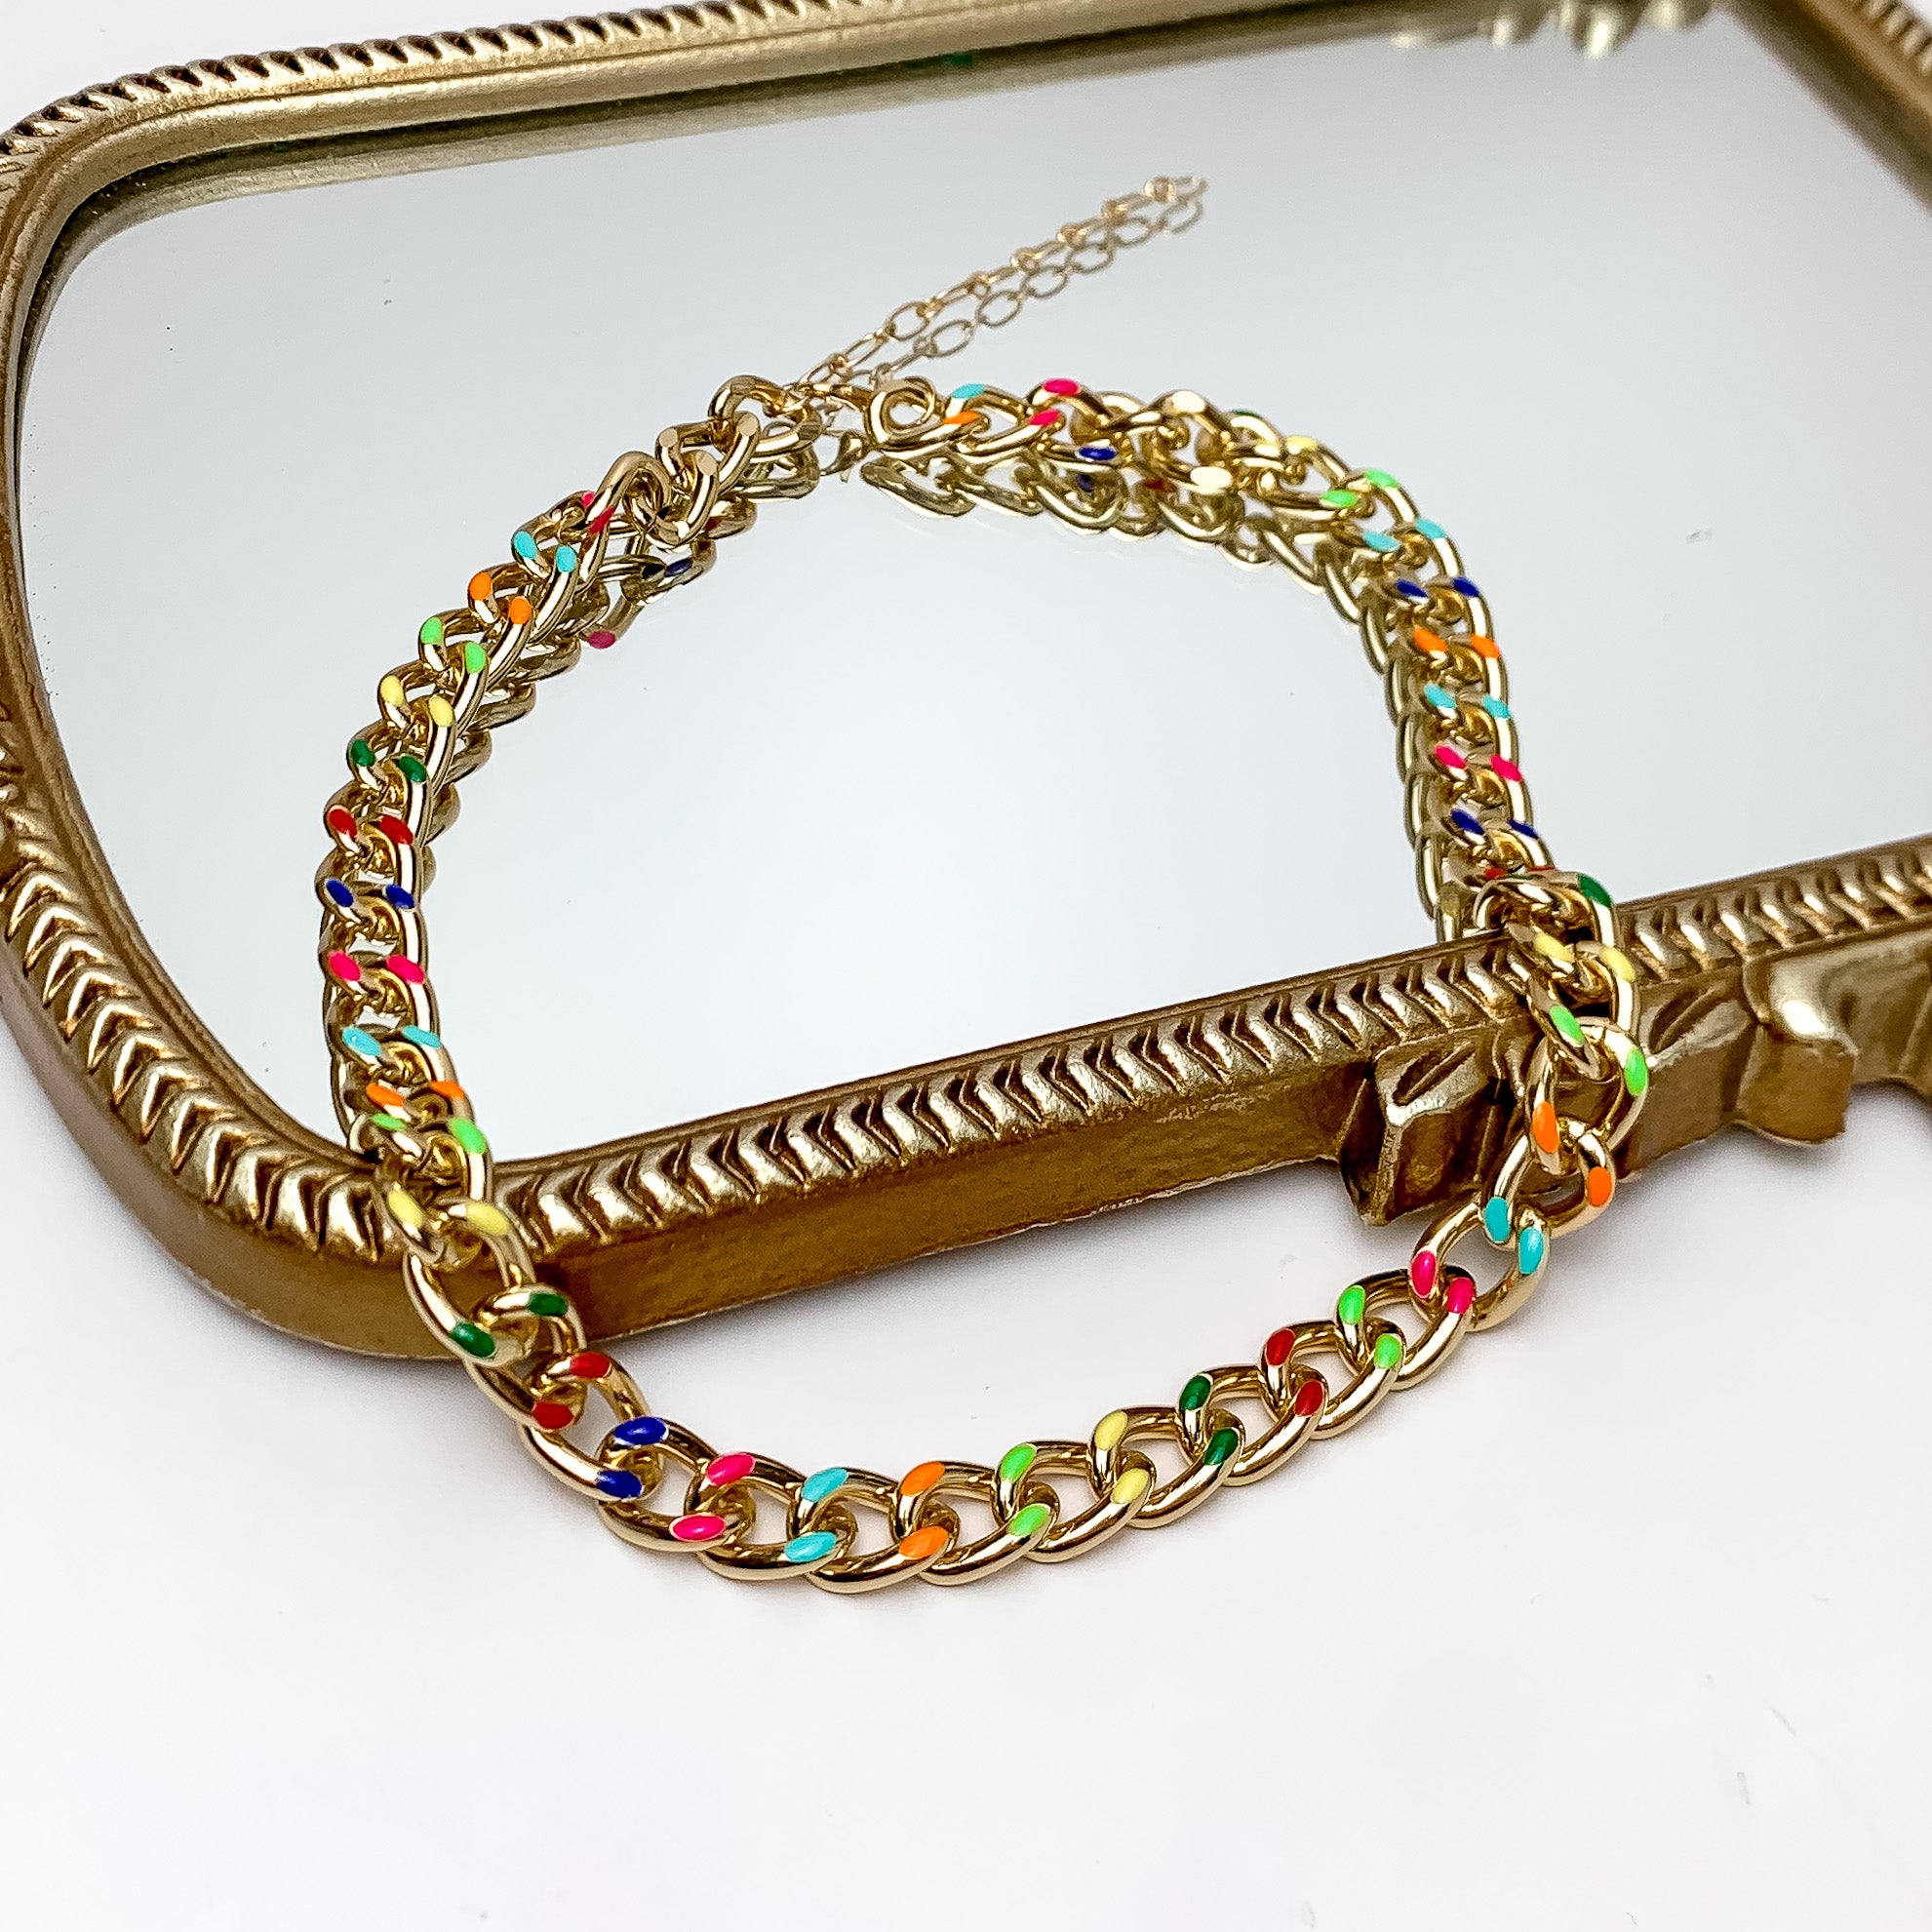 Gold Tone Chain With Accents of Multicolor. Pictured on a white background with part of the necklace on a gold trimmed mirror.